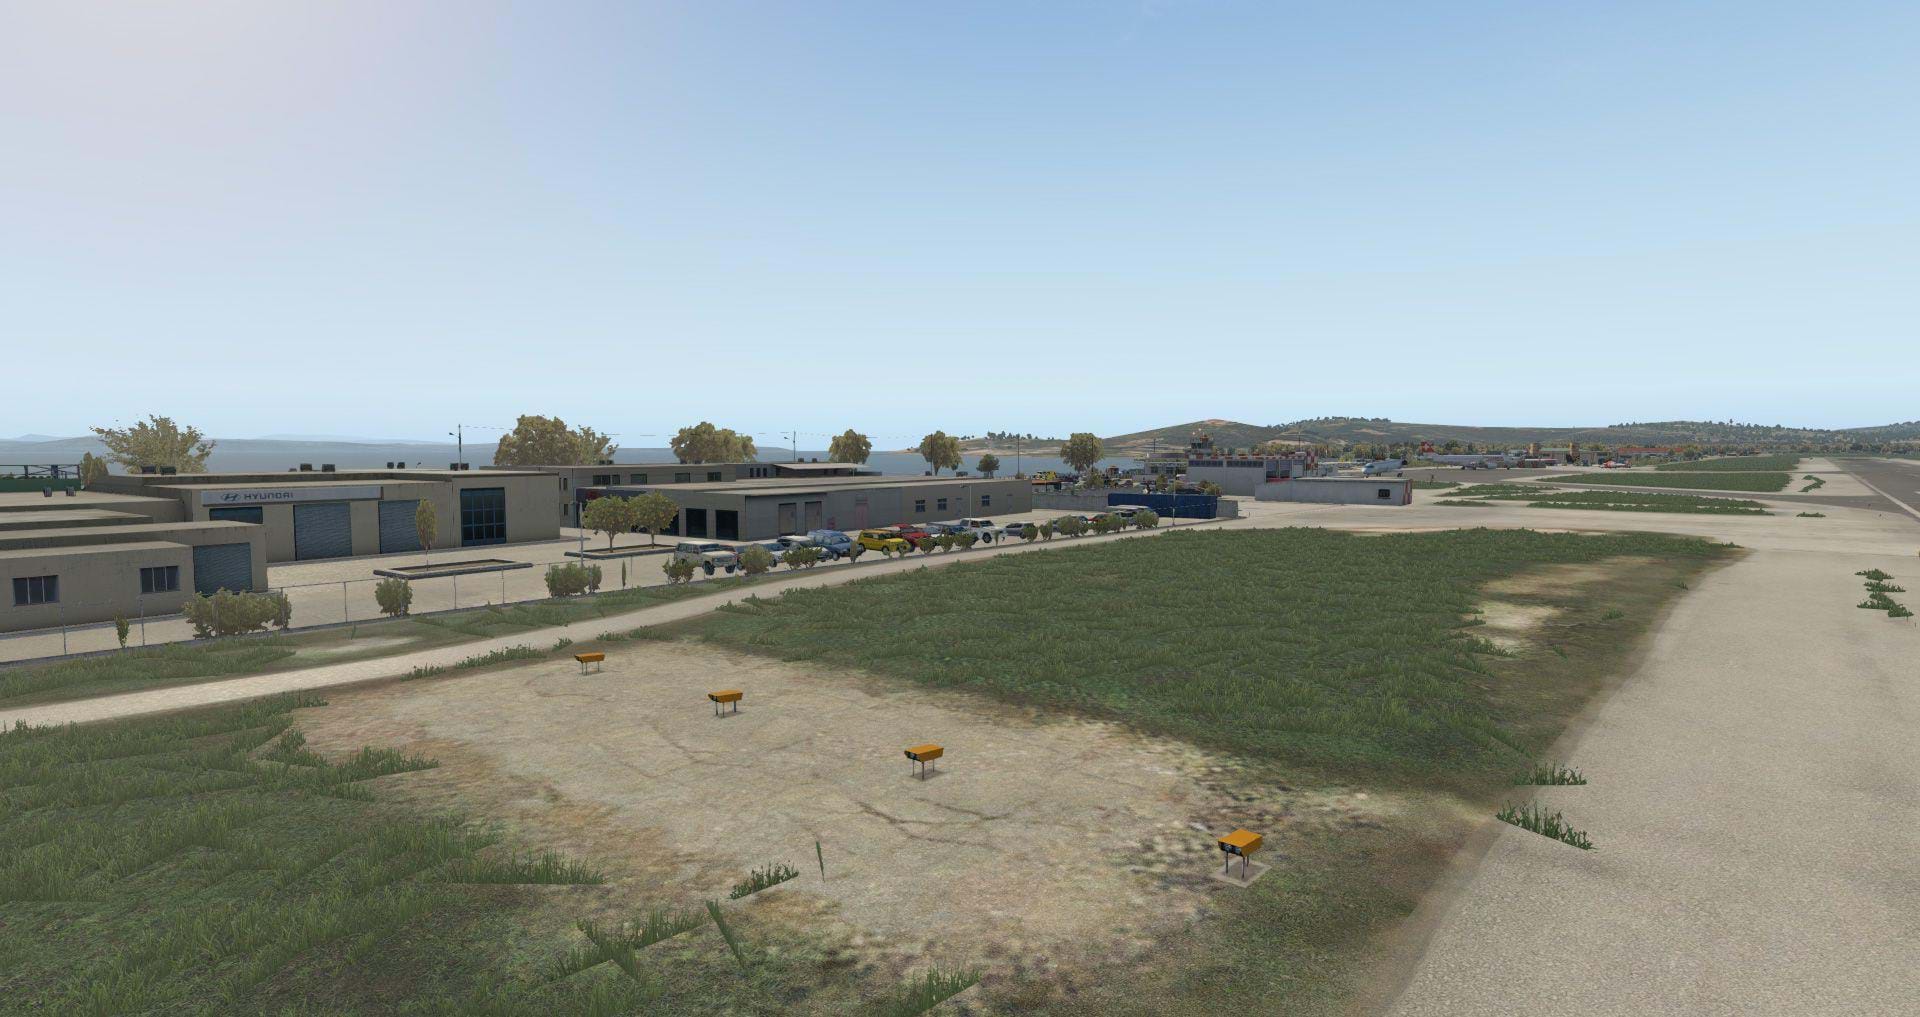 Descent 2 View Chios for X-Plane